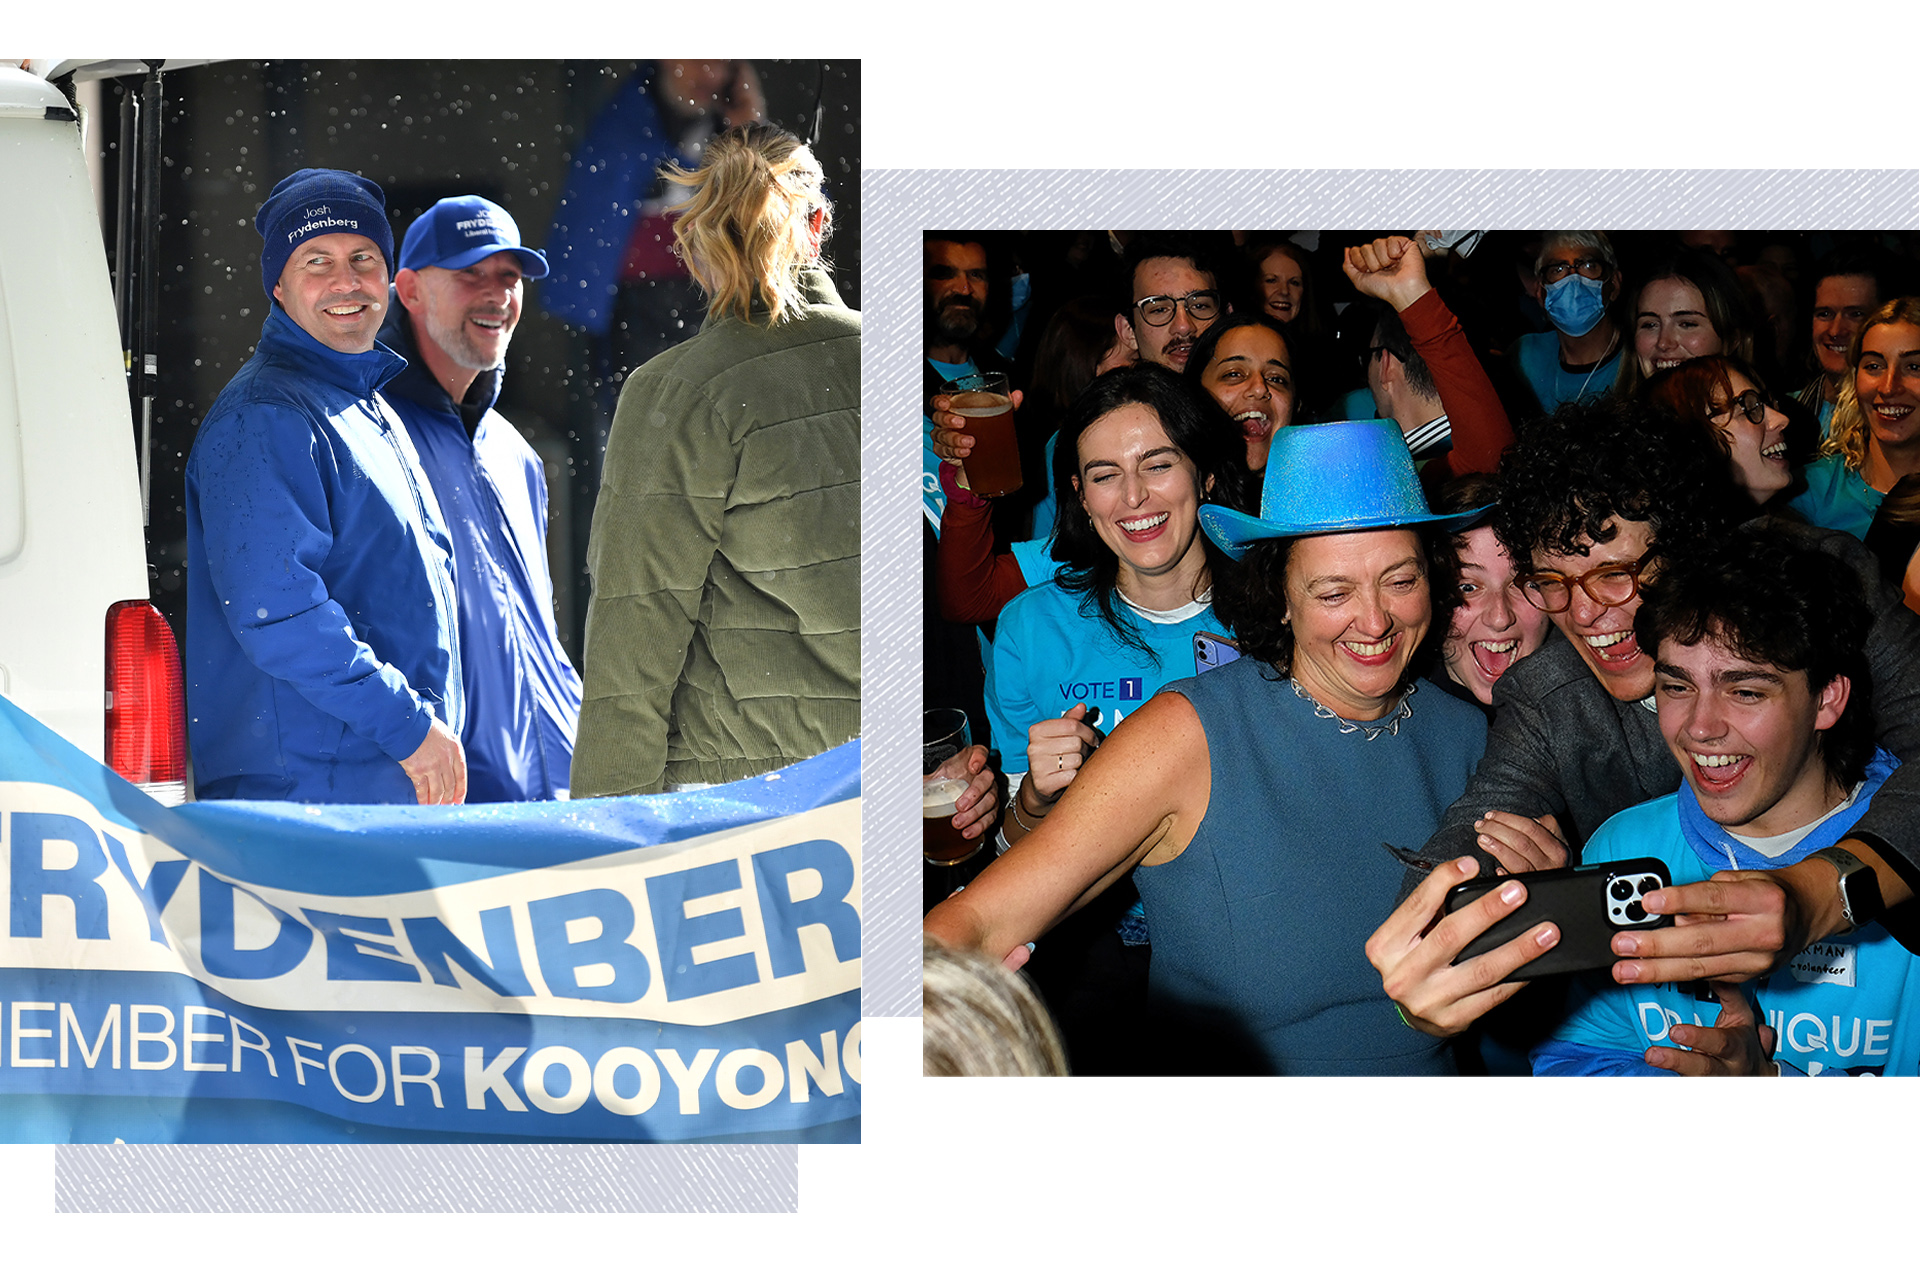 Josh Frydenberg campaigns in a beanie and blue coat, while Monique Ryan celebrates her victory with her supporters at a pub.